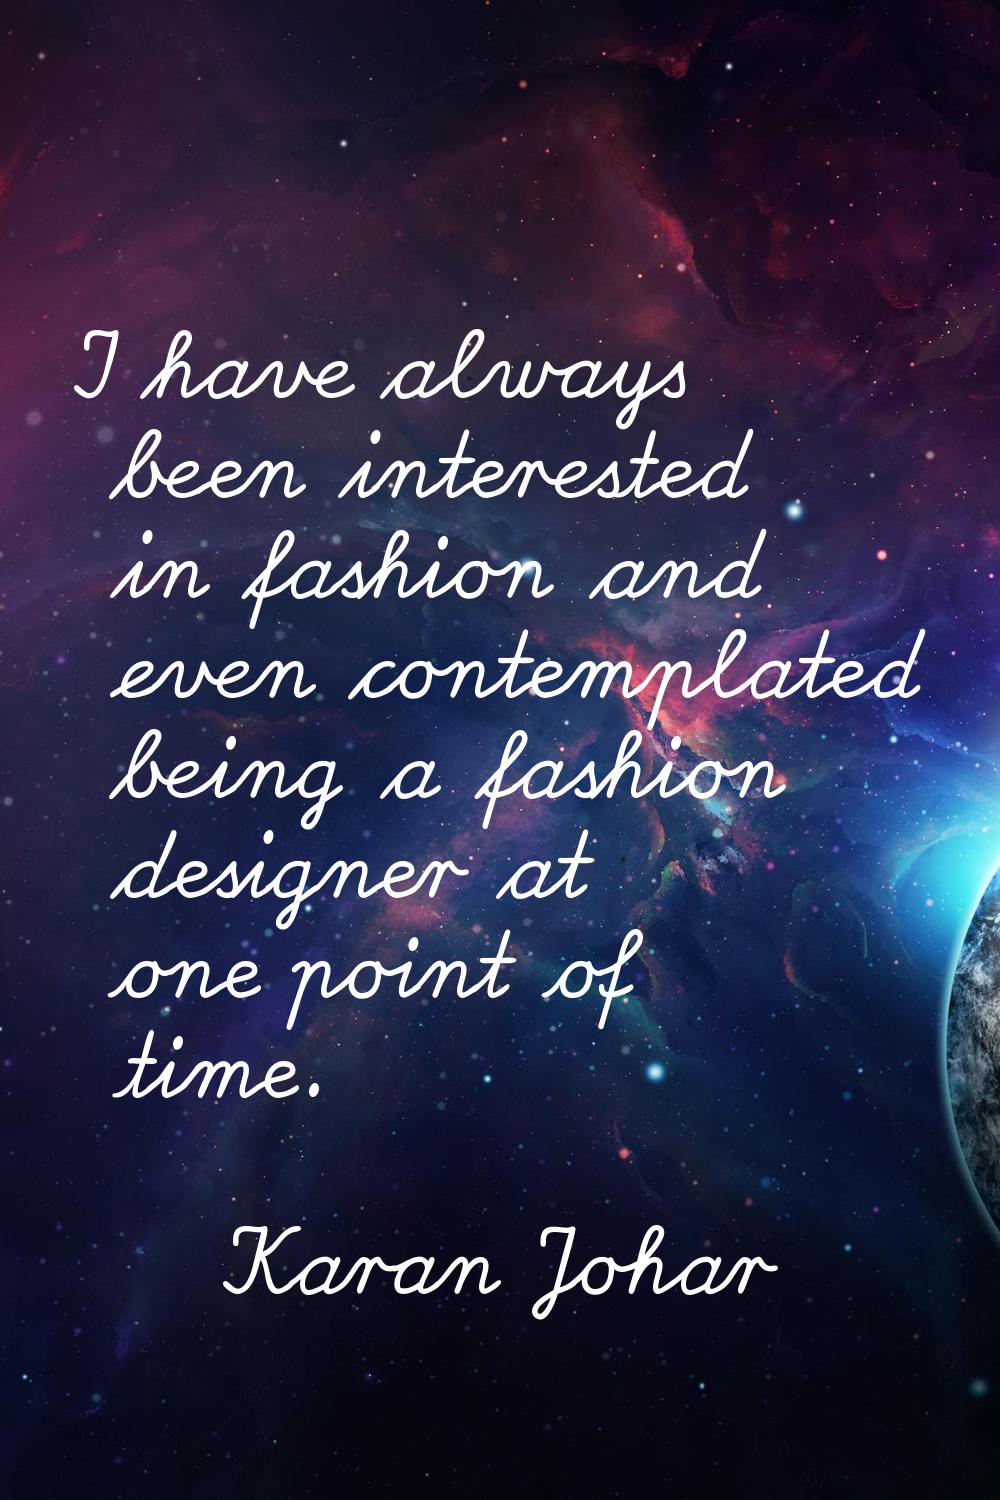 I have always been interested in fashion and even contemplated being a fashion designer at one poin